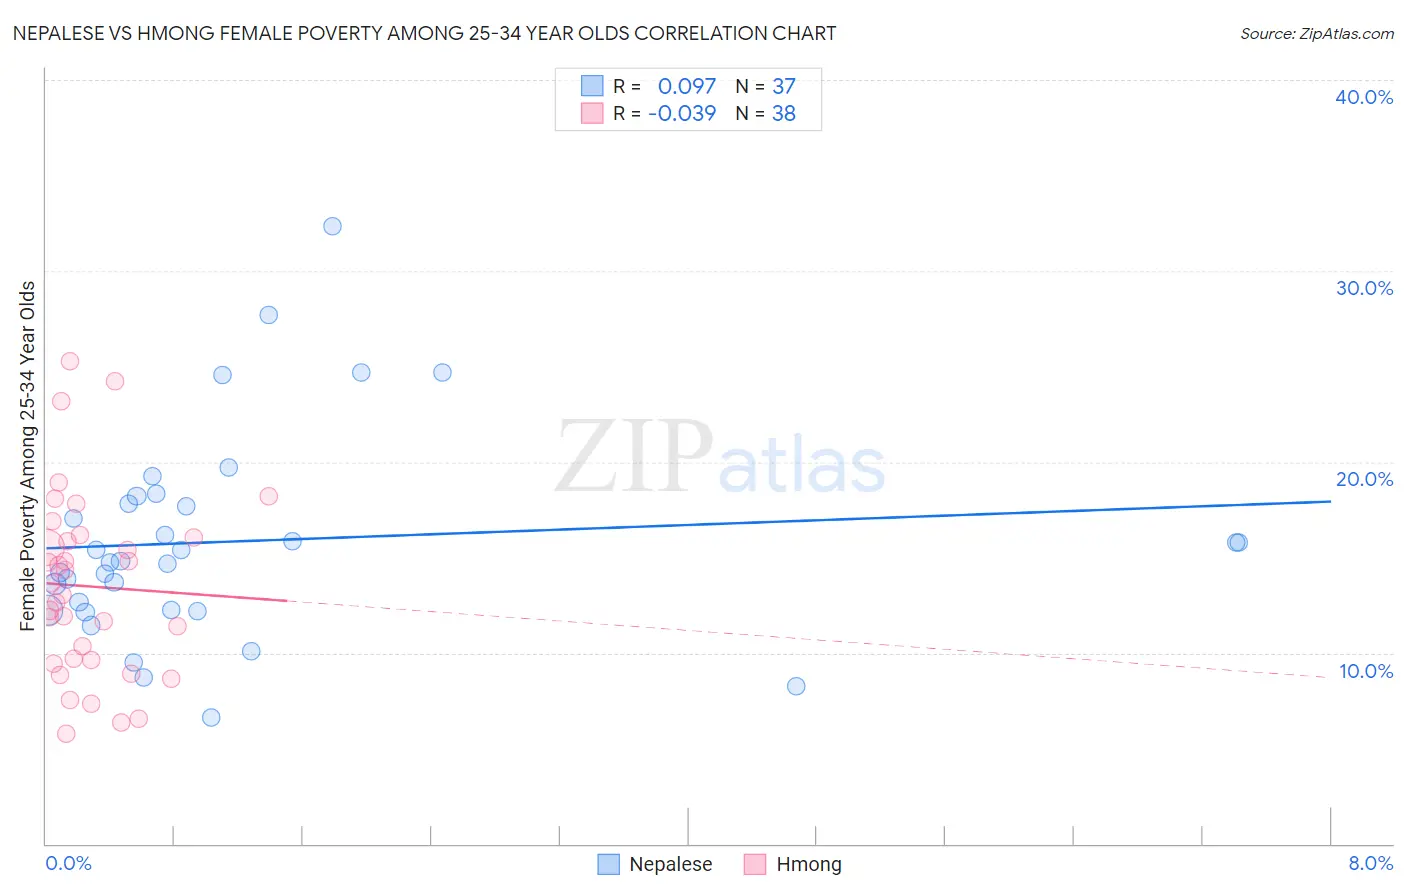 Nepalese vs Hmong Female Poverty Among 25-34 Year Olds